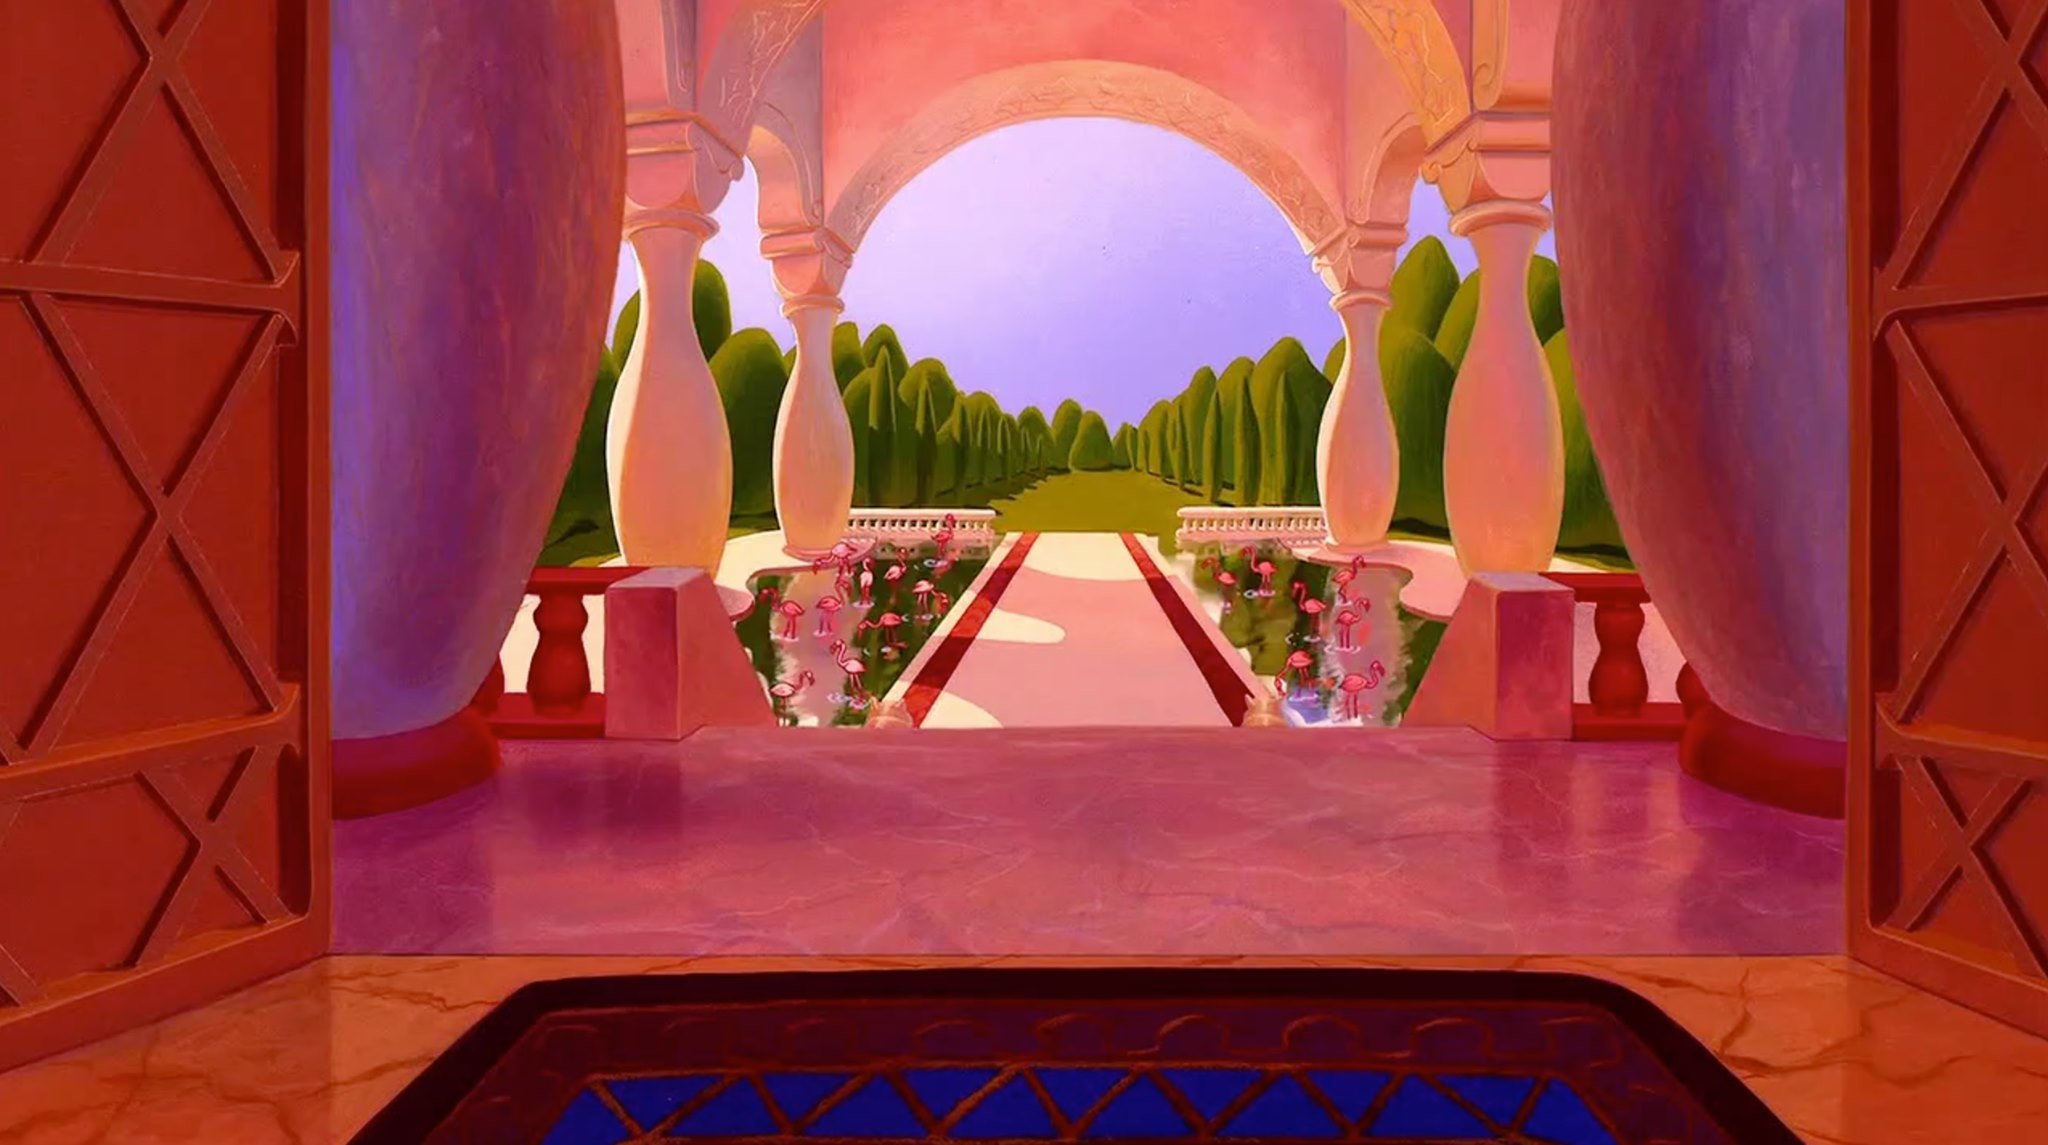 interior of the sultan's palace from Aladdin